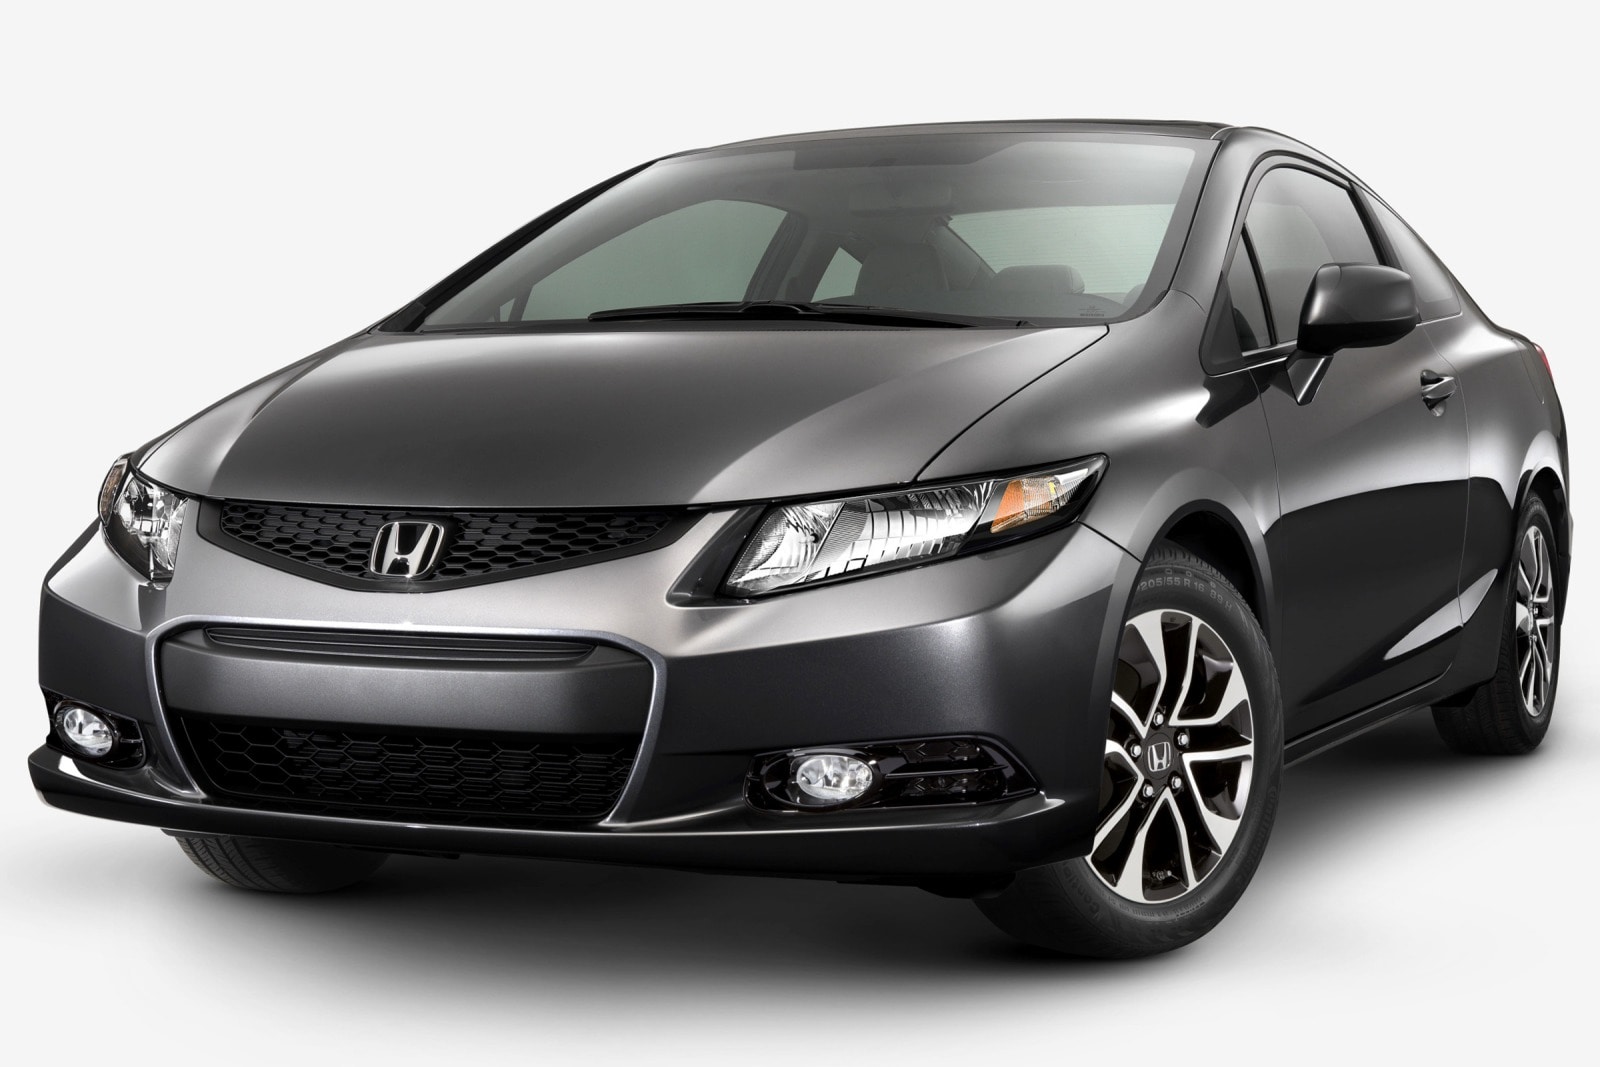 Used 2013 Honda Civic Coupe Review | Edmunds